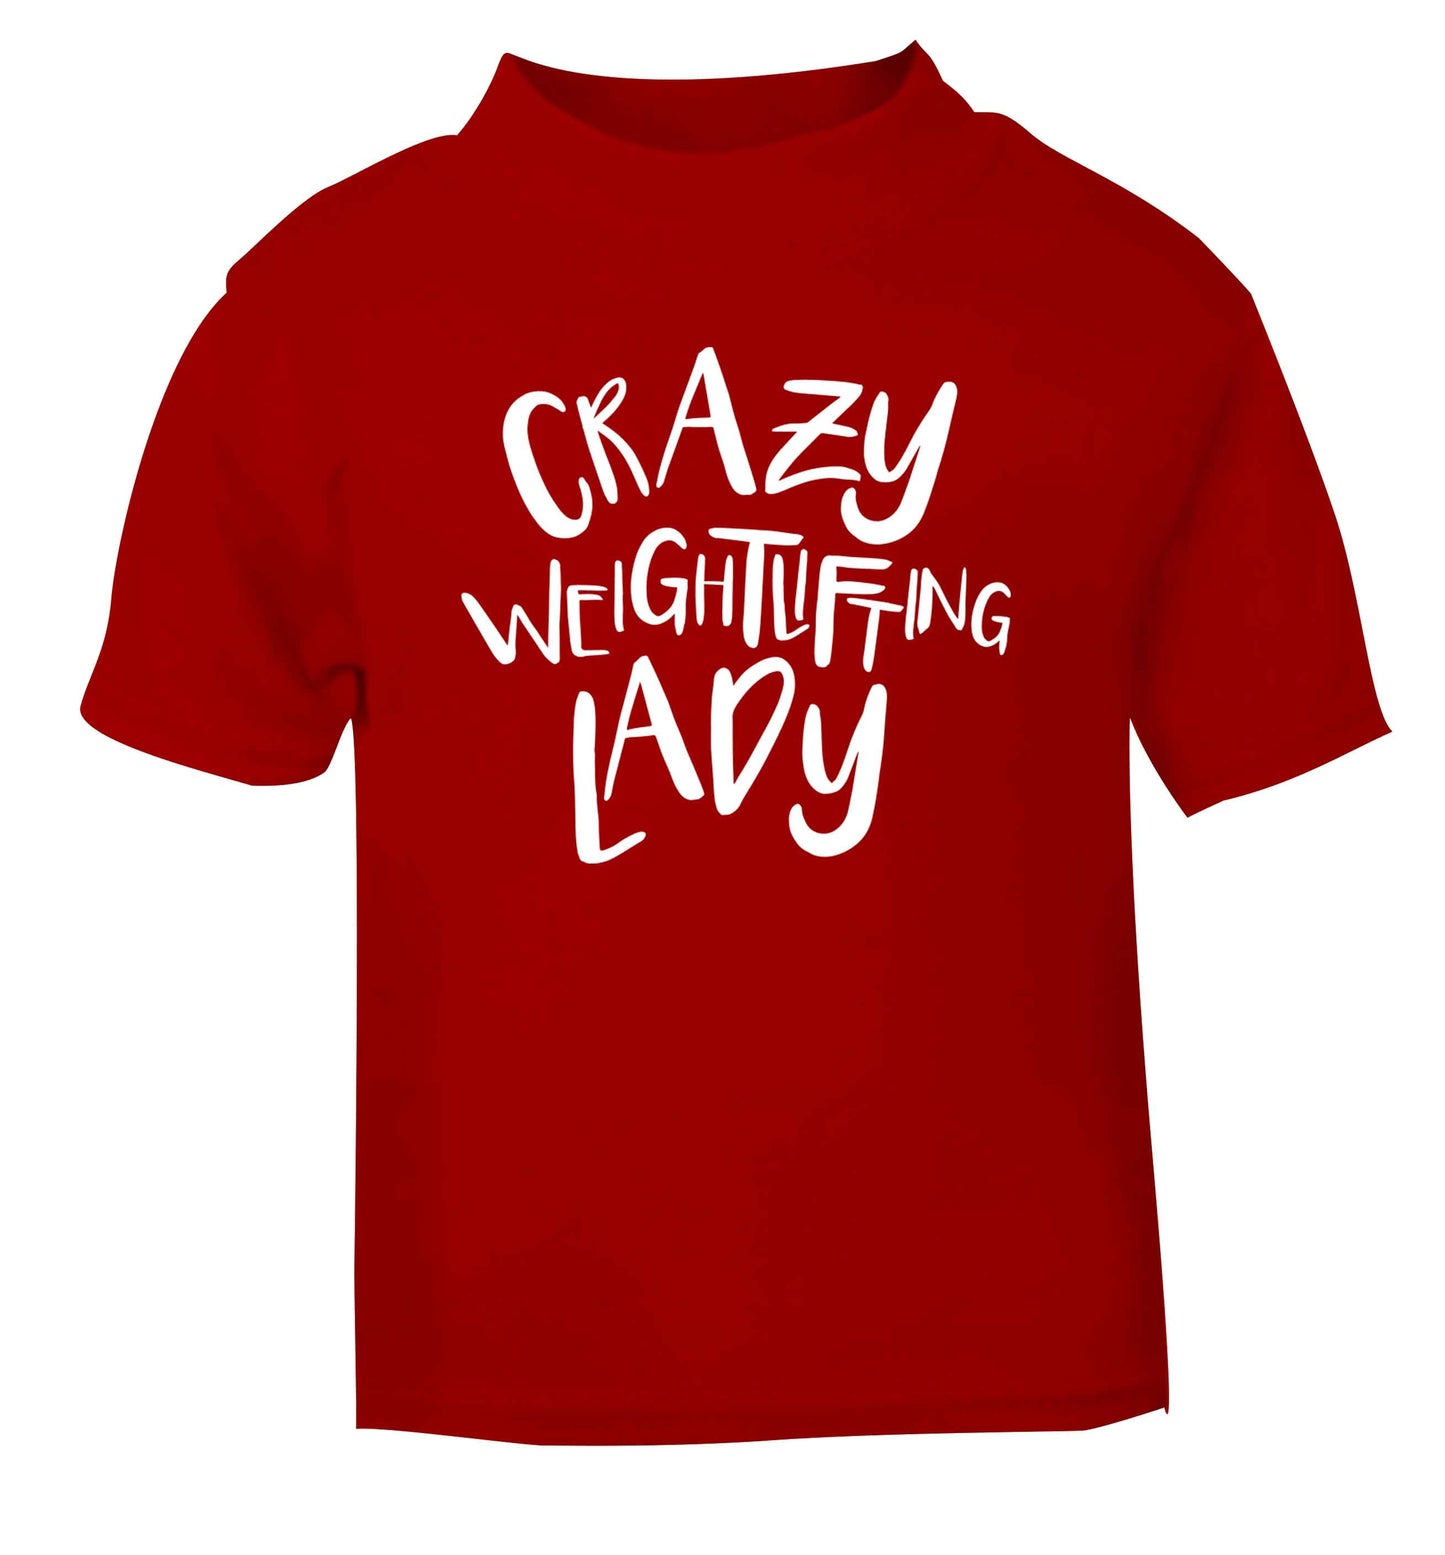 Crazy weightlifting lady red Baby Toddler Tshirt 2 Years